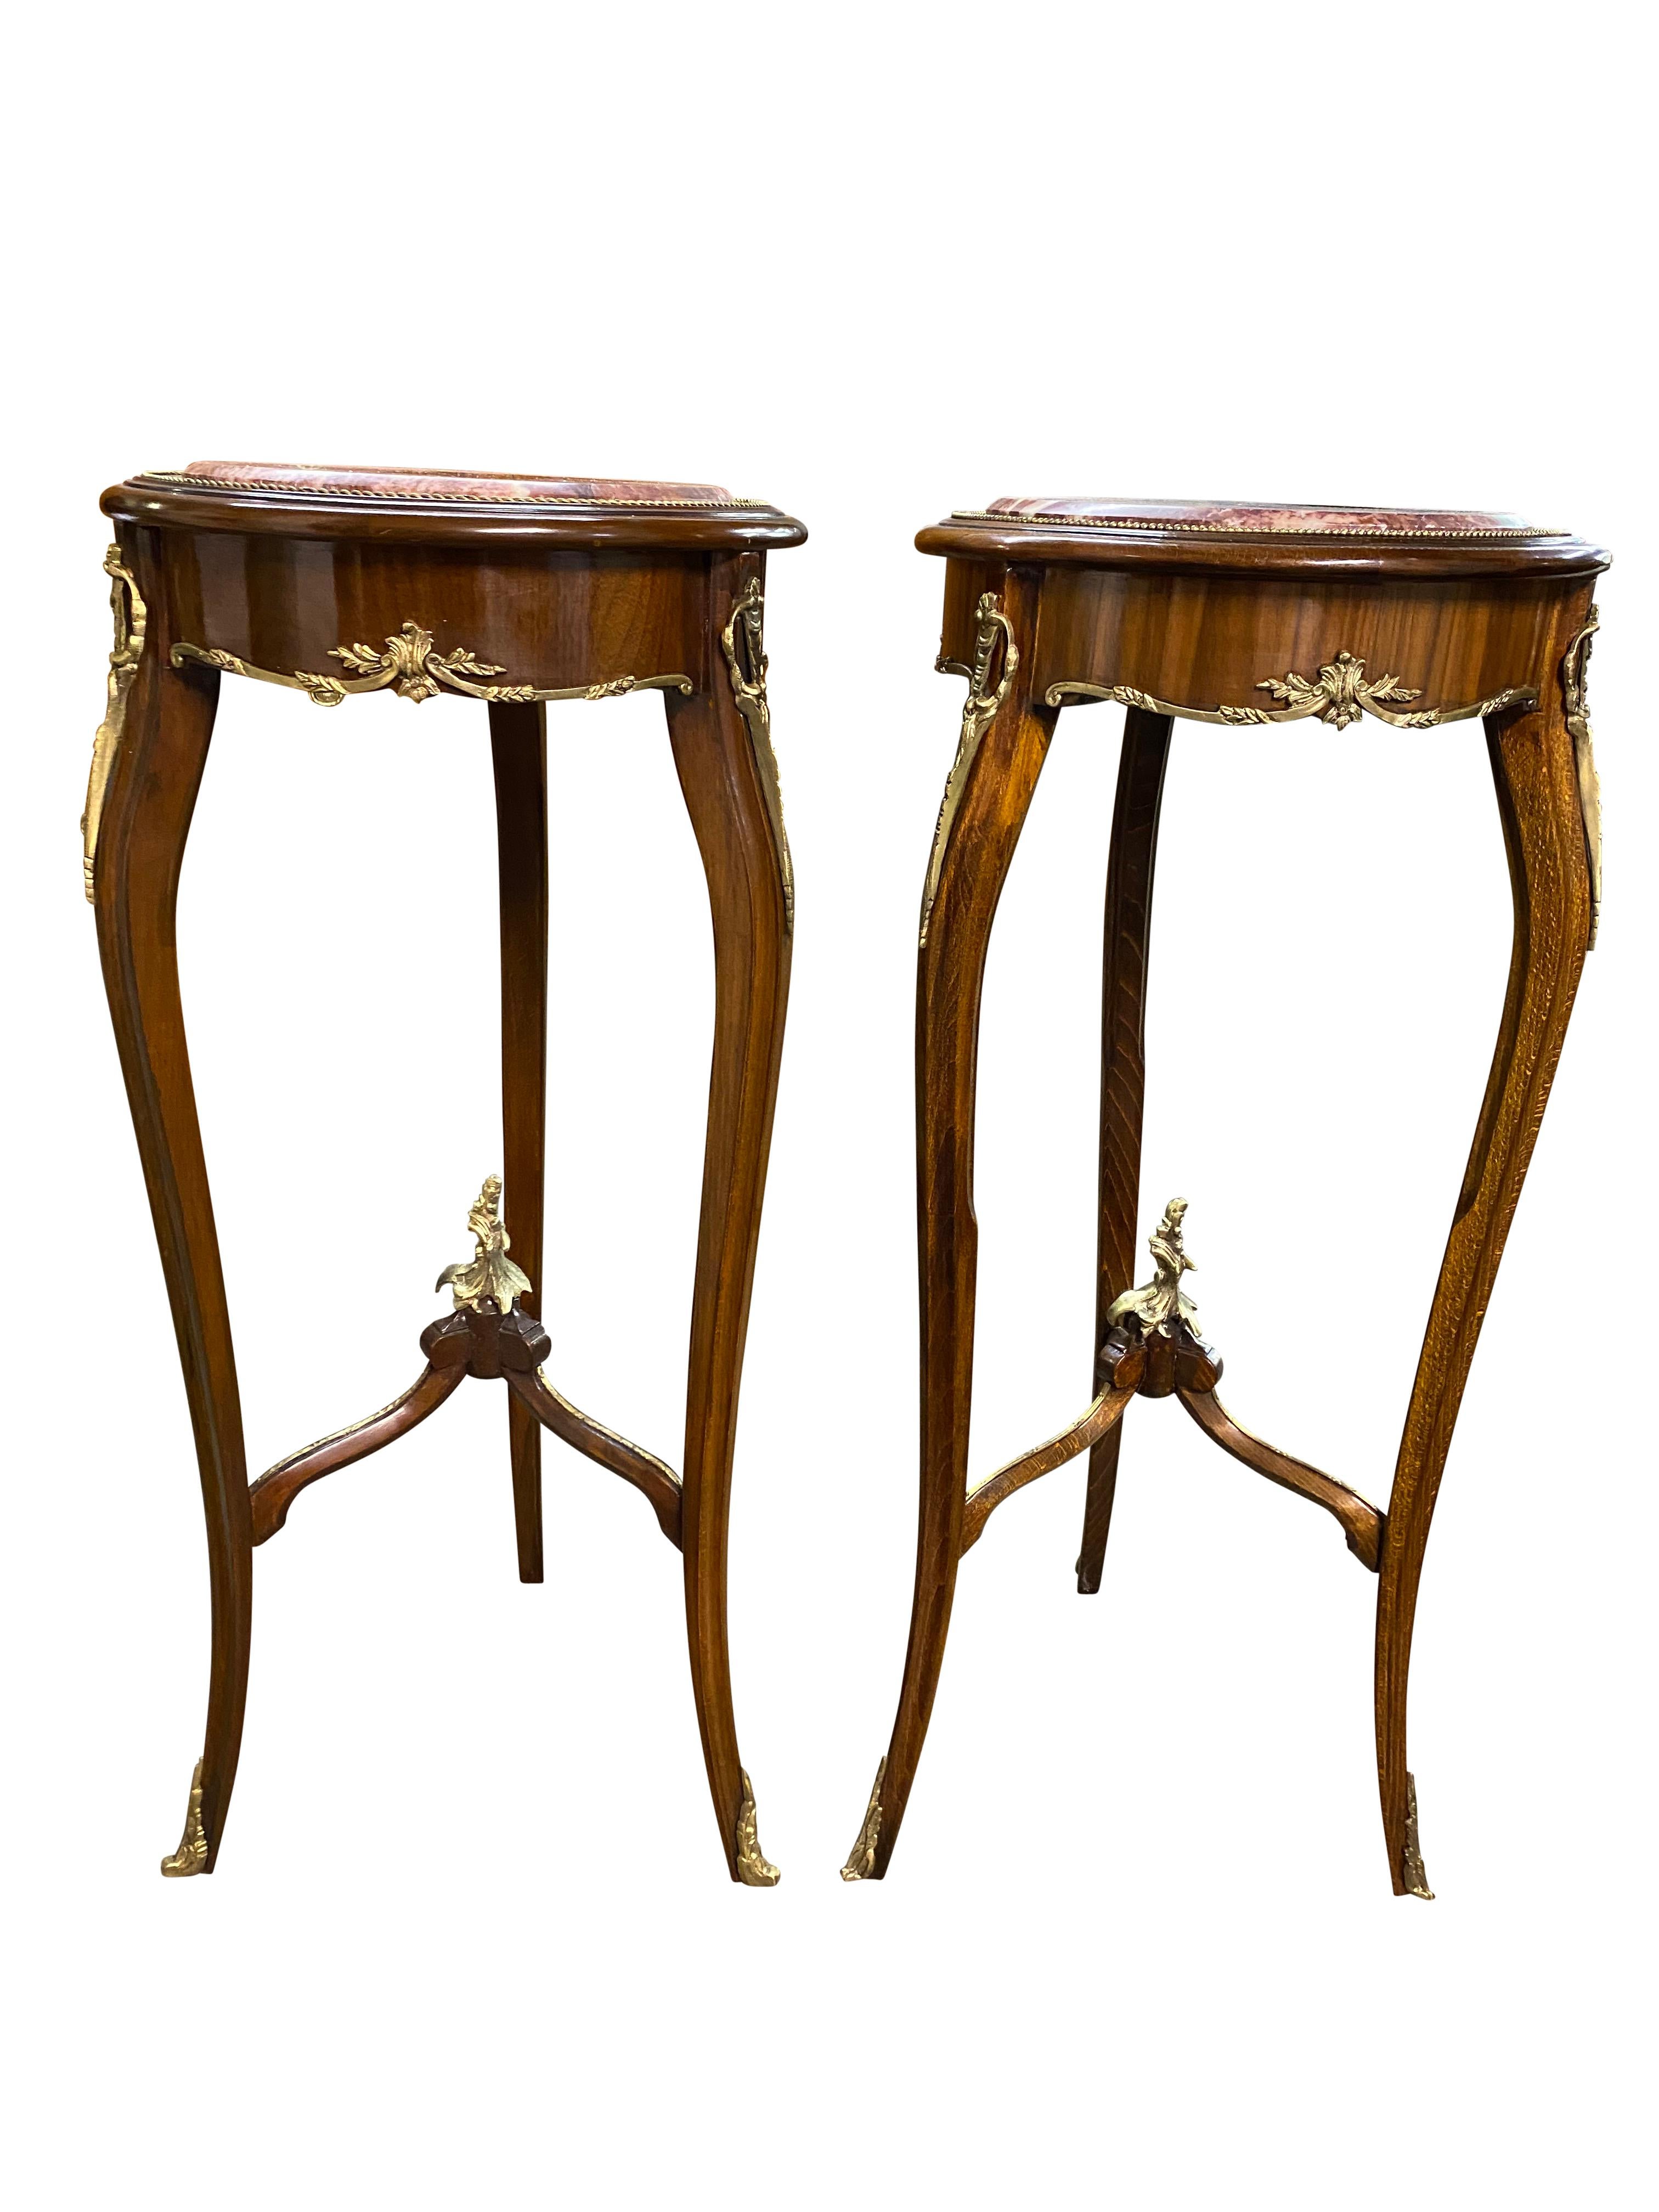 A stunning pair of 20th century oval marble top Empire style side tables. A gorgeous and elegant design perfect for modern interiors.